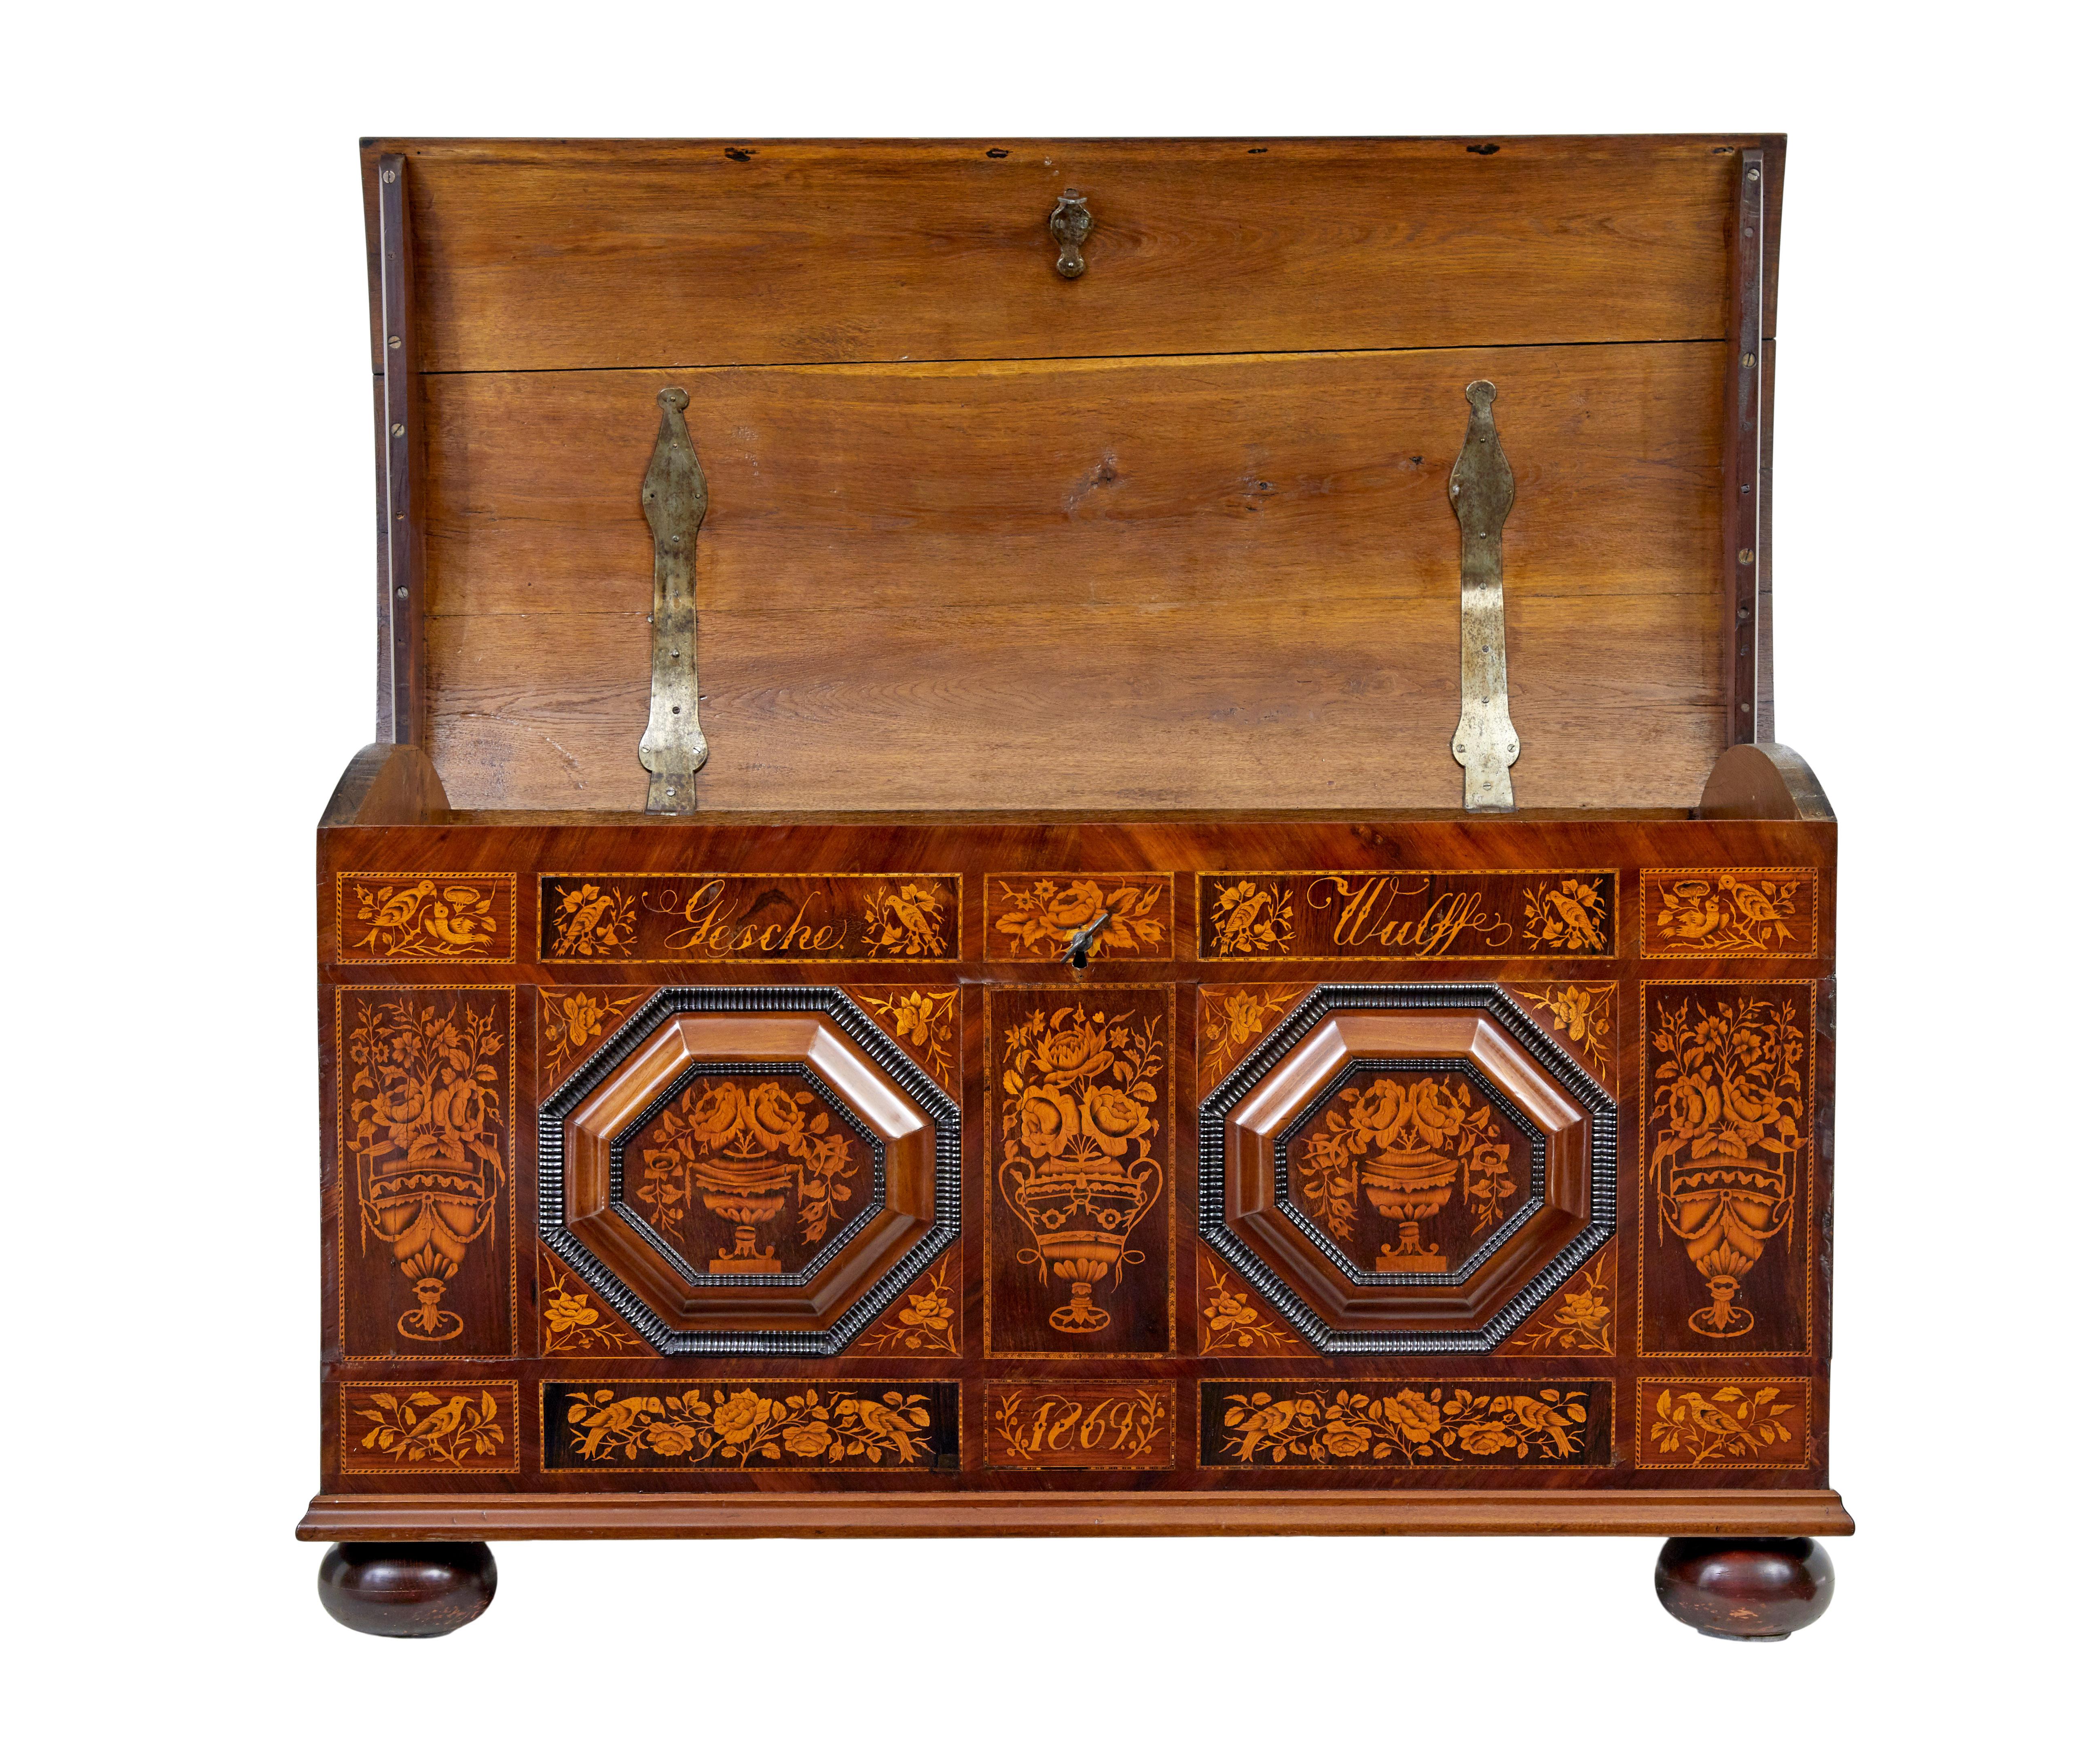 Baroque Revival Mid 19th century profusely inlaid continental walnut dome coffer For Sale